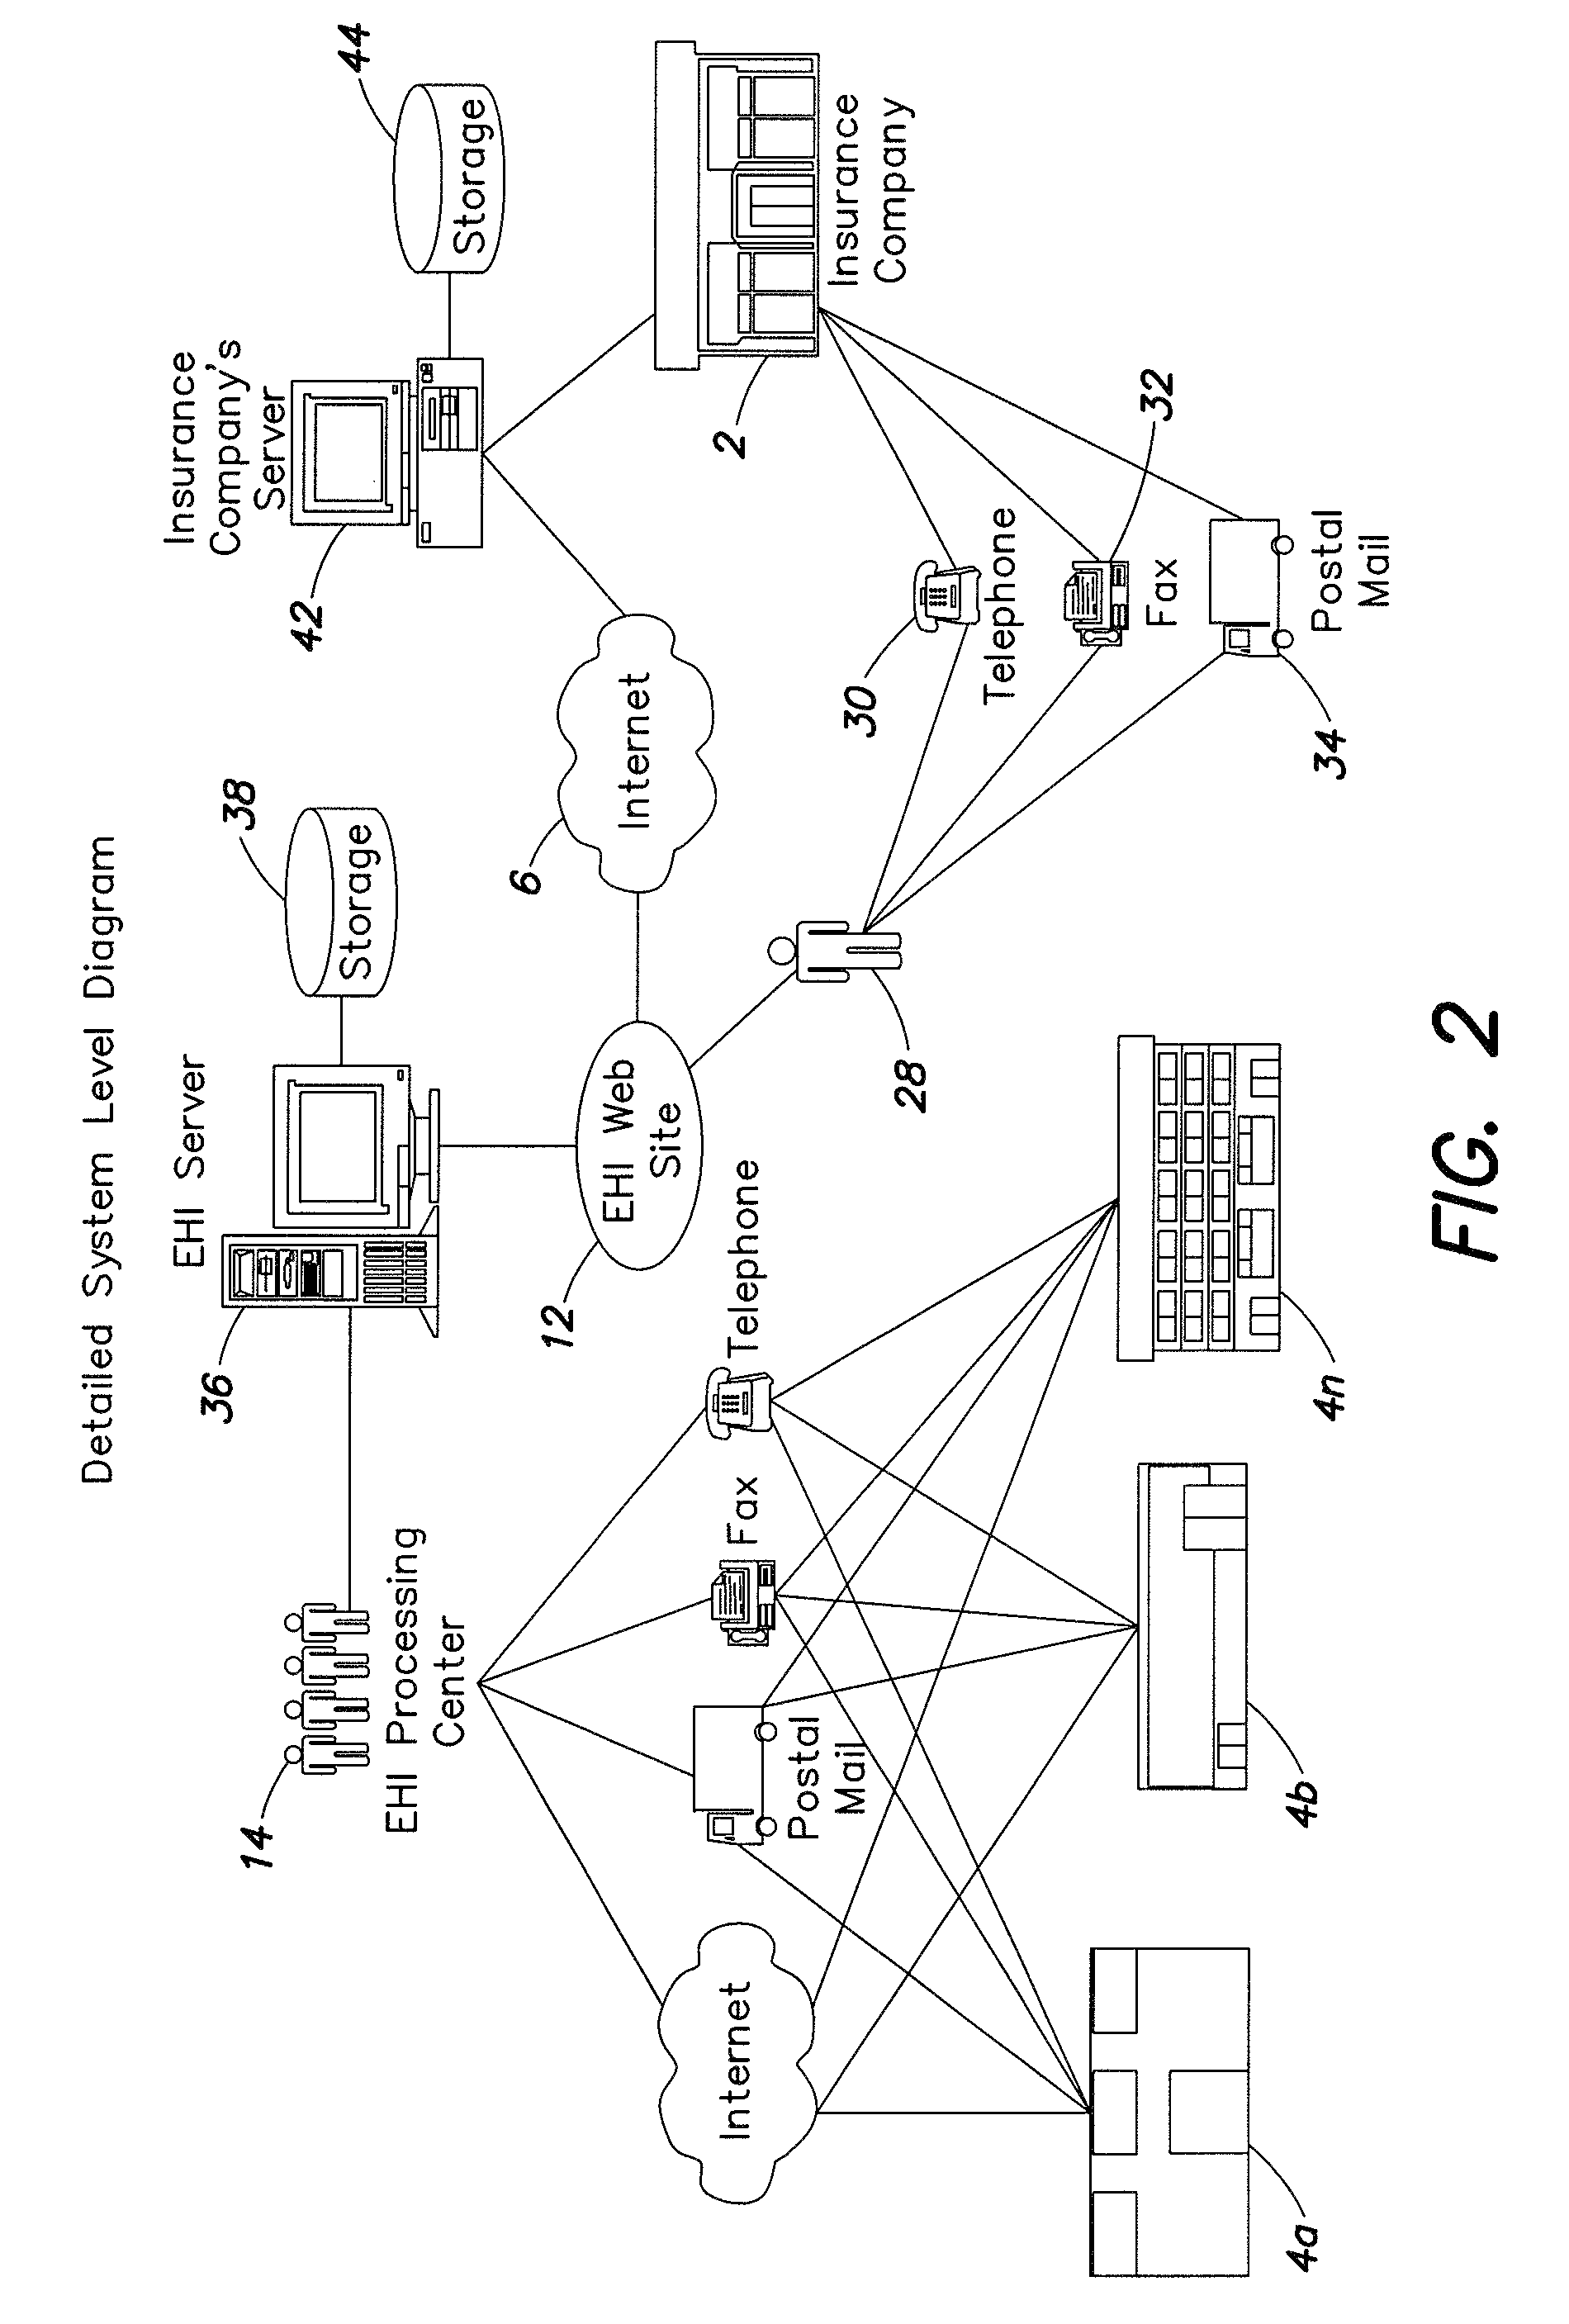 Method and system for obtaining health-related records and documents using an online location